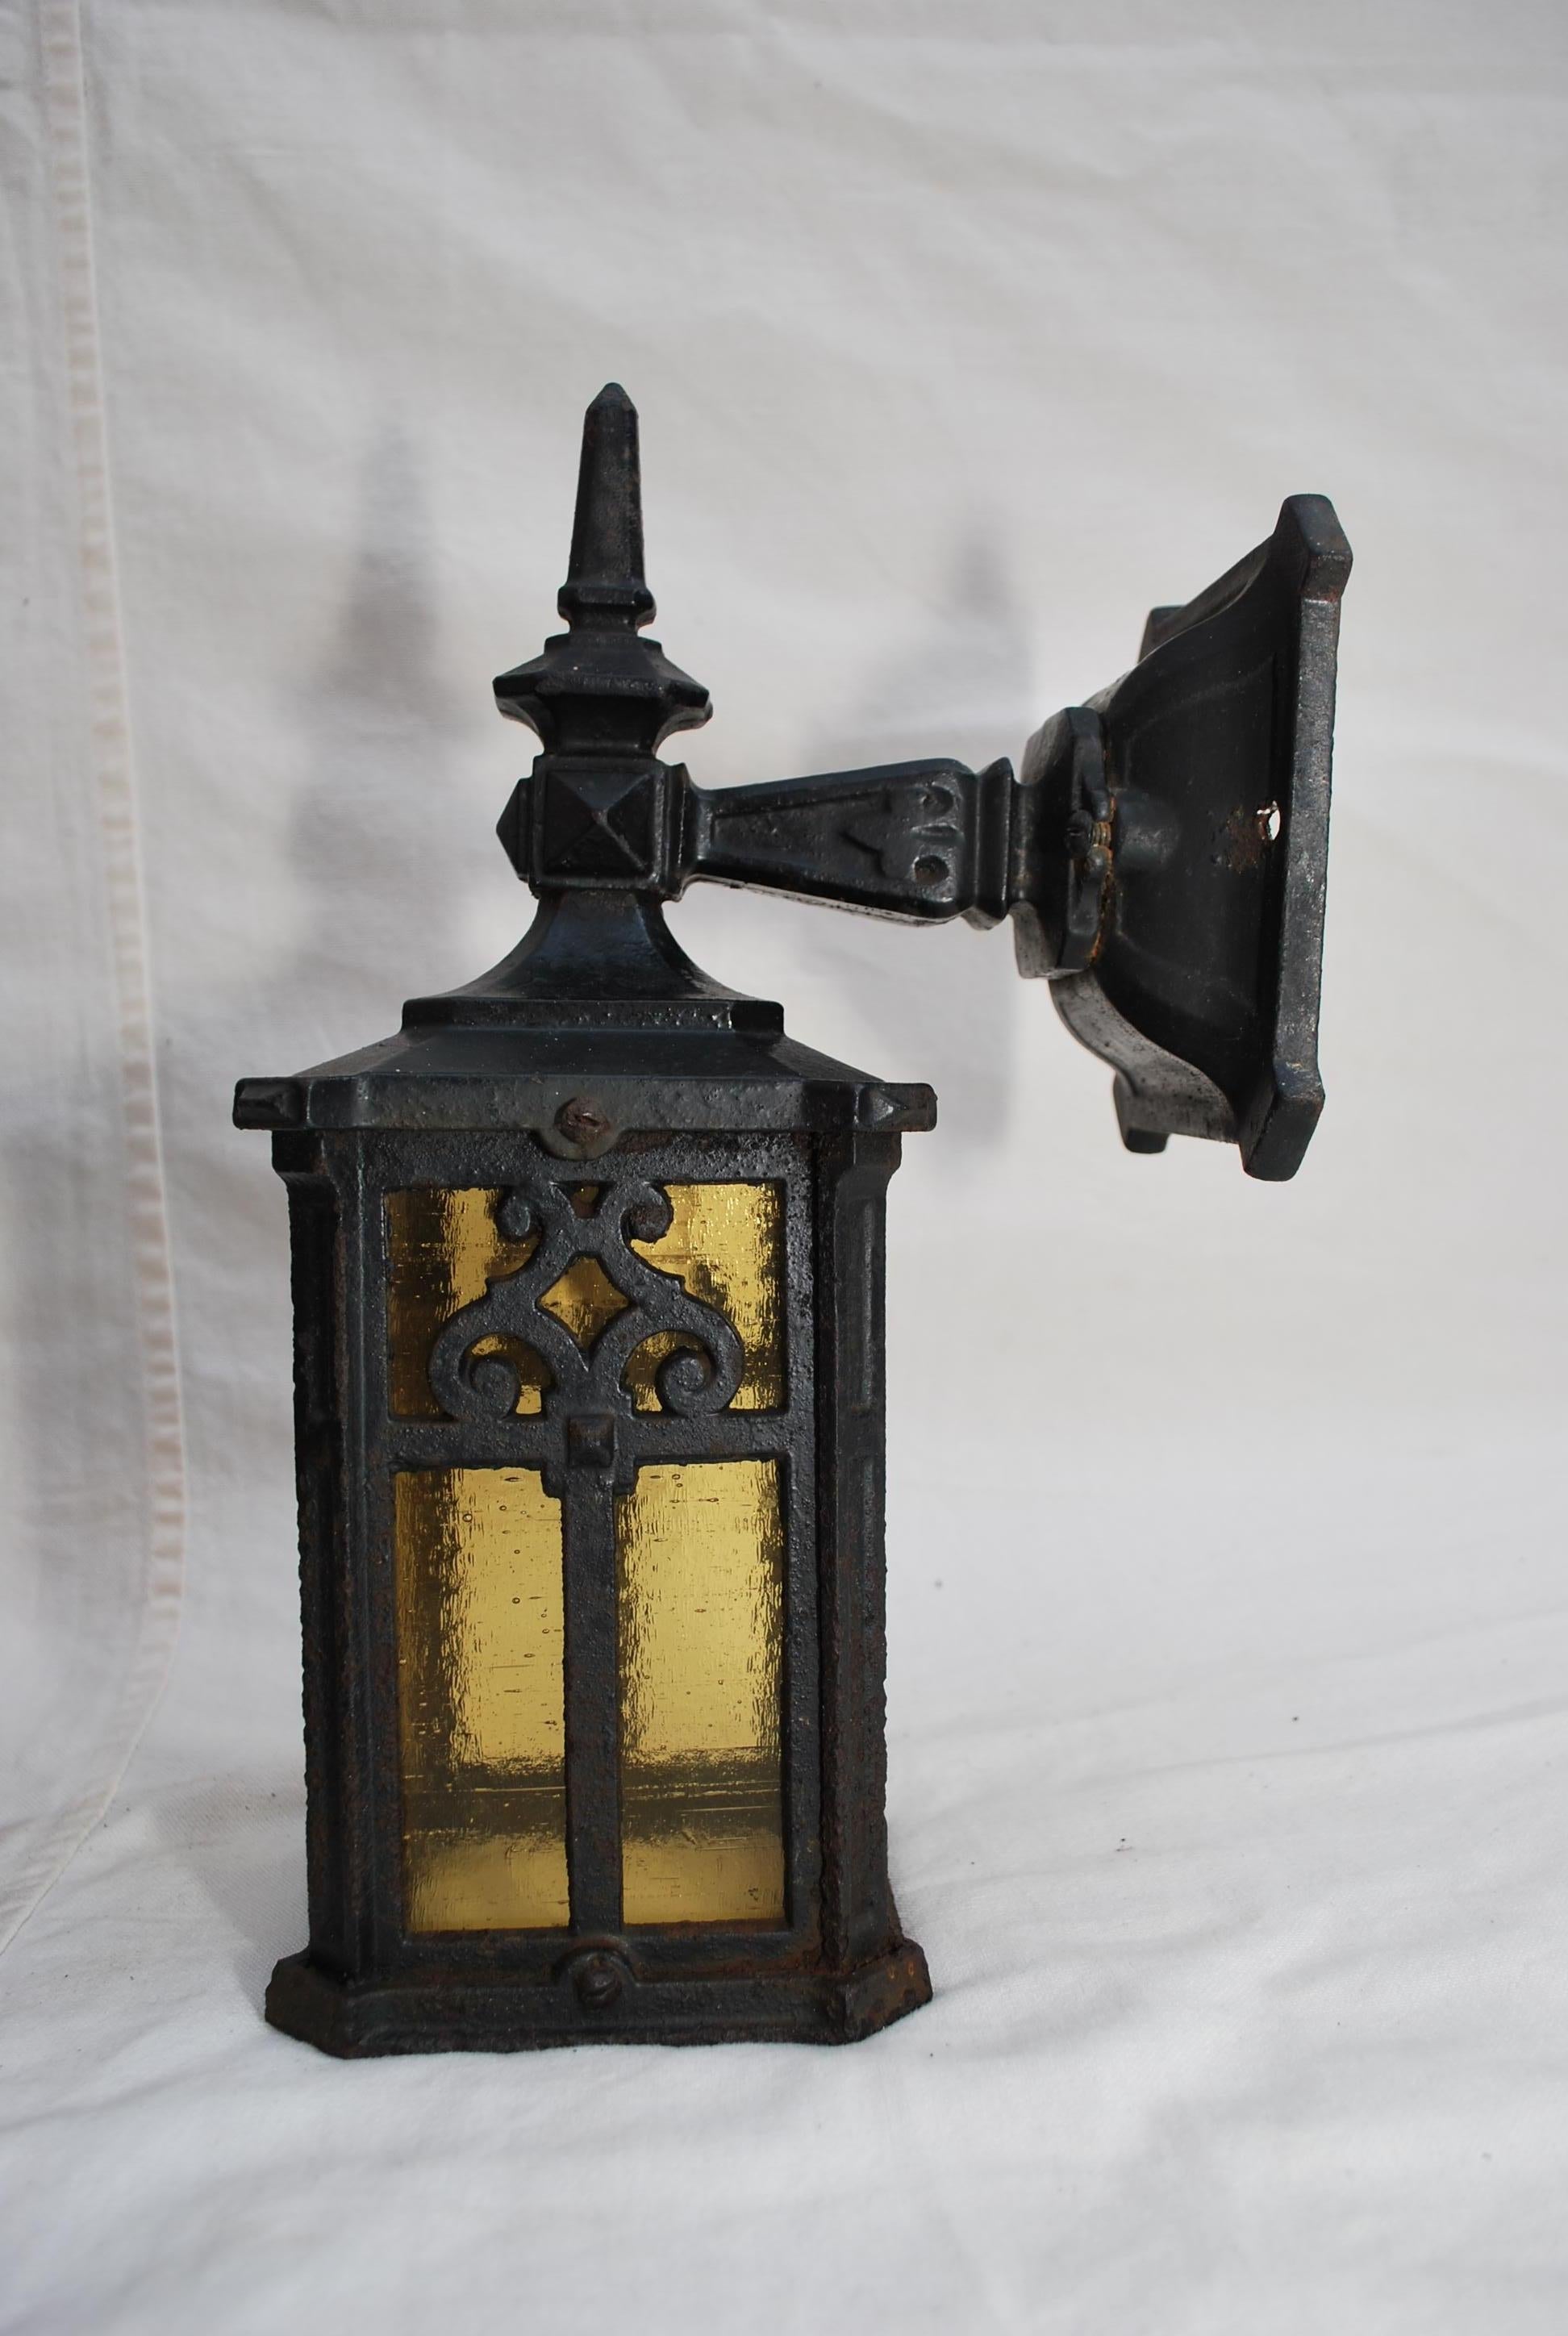 A very nice pair of solid cast iron outdoor/indoor sconces, the patina is allot nicer in person